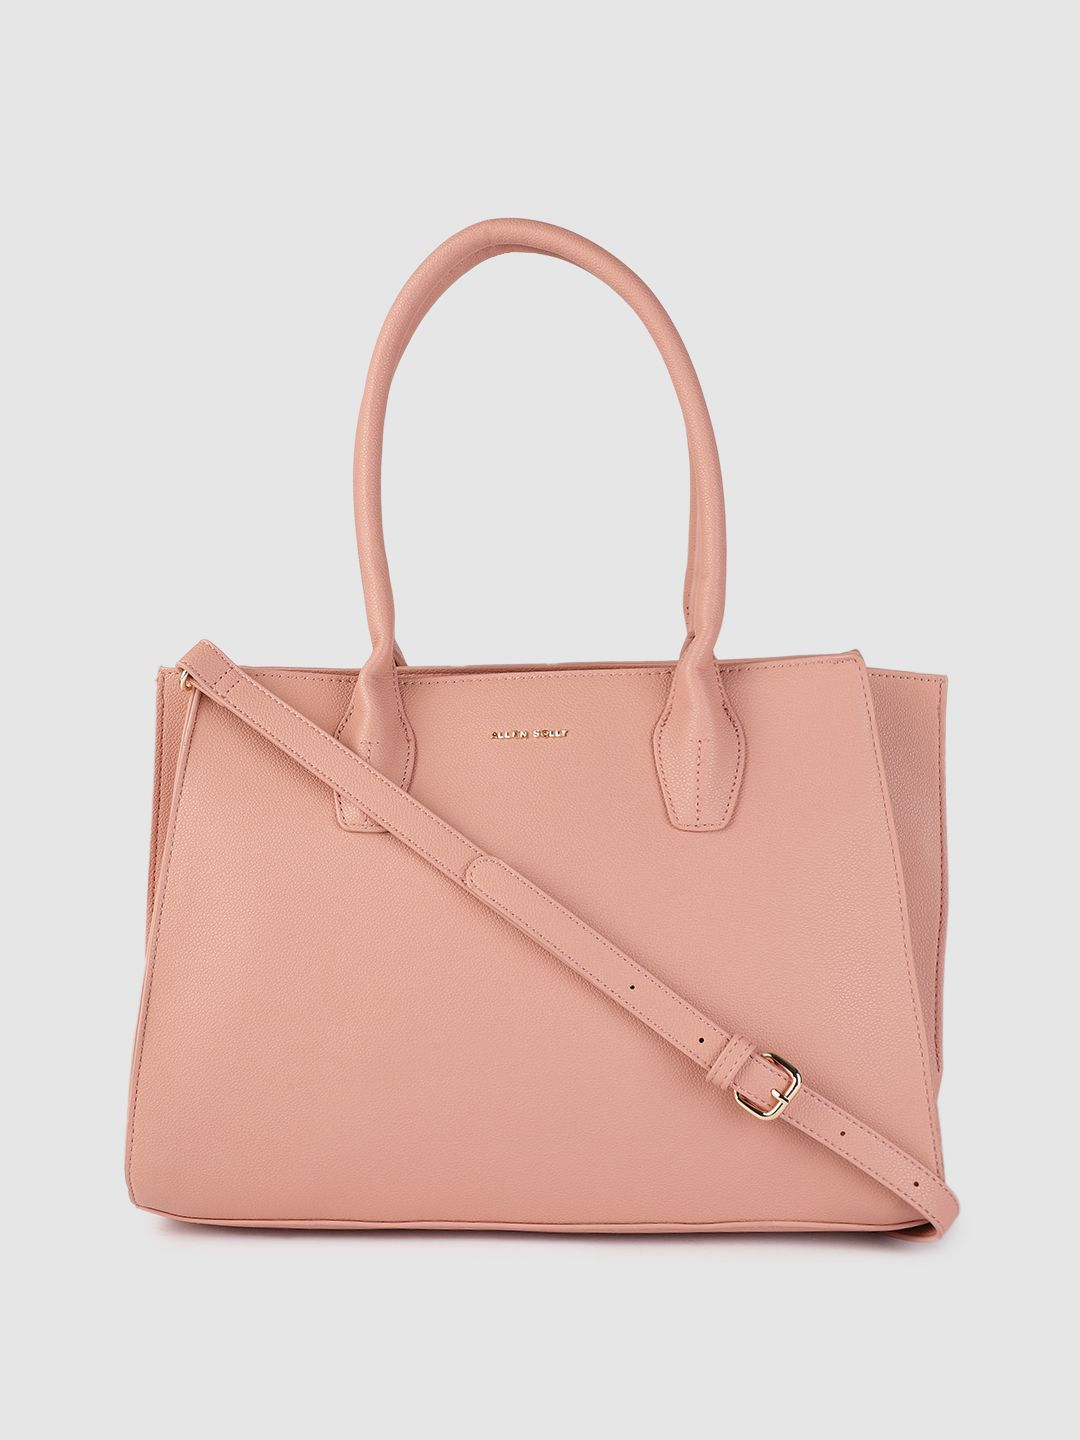 Allen Solly Pink Solid Structured Handheld Bag Price in India